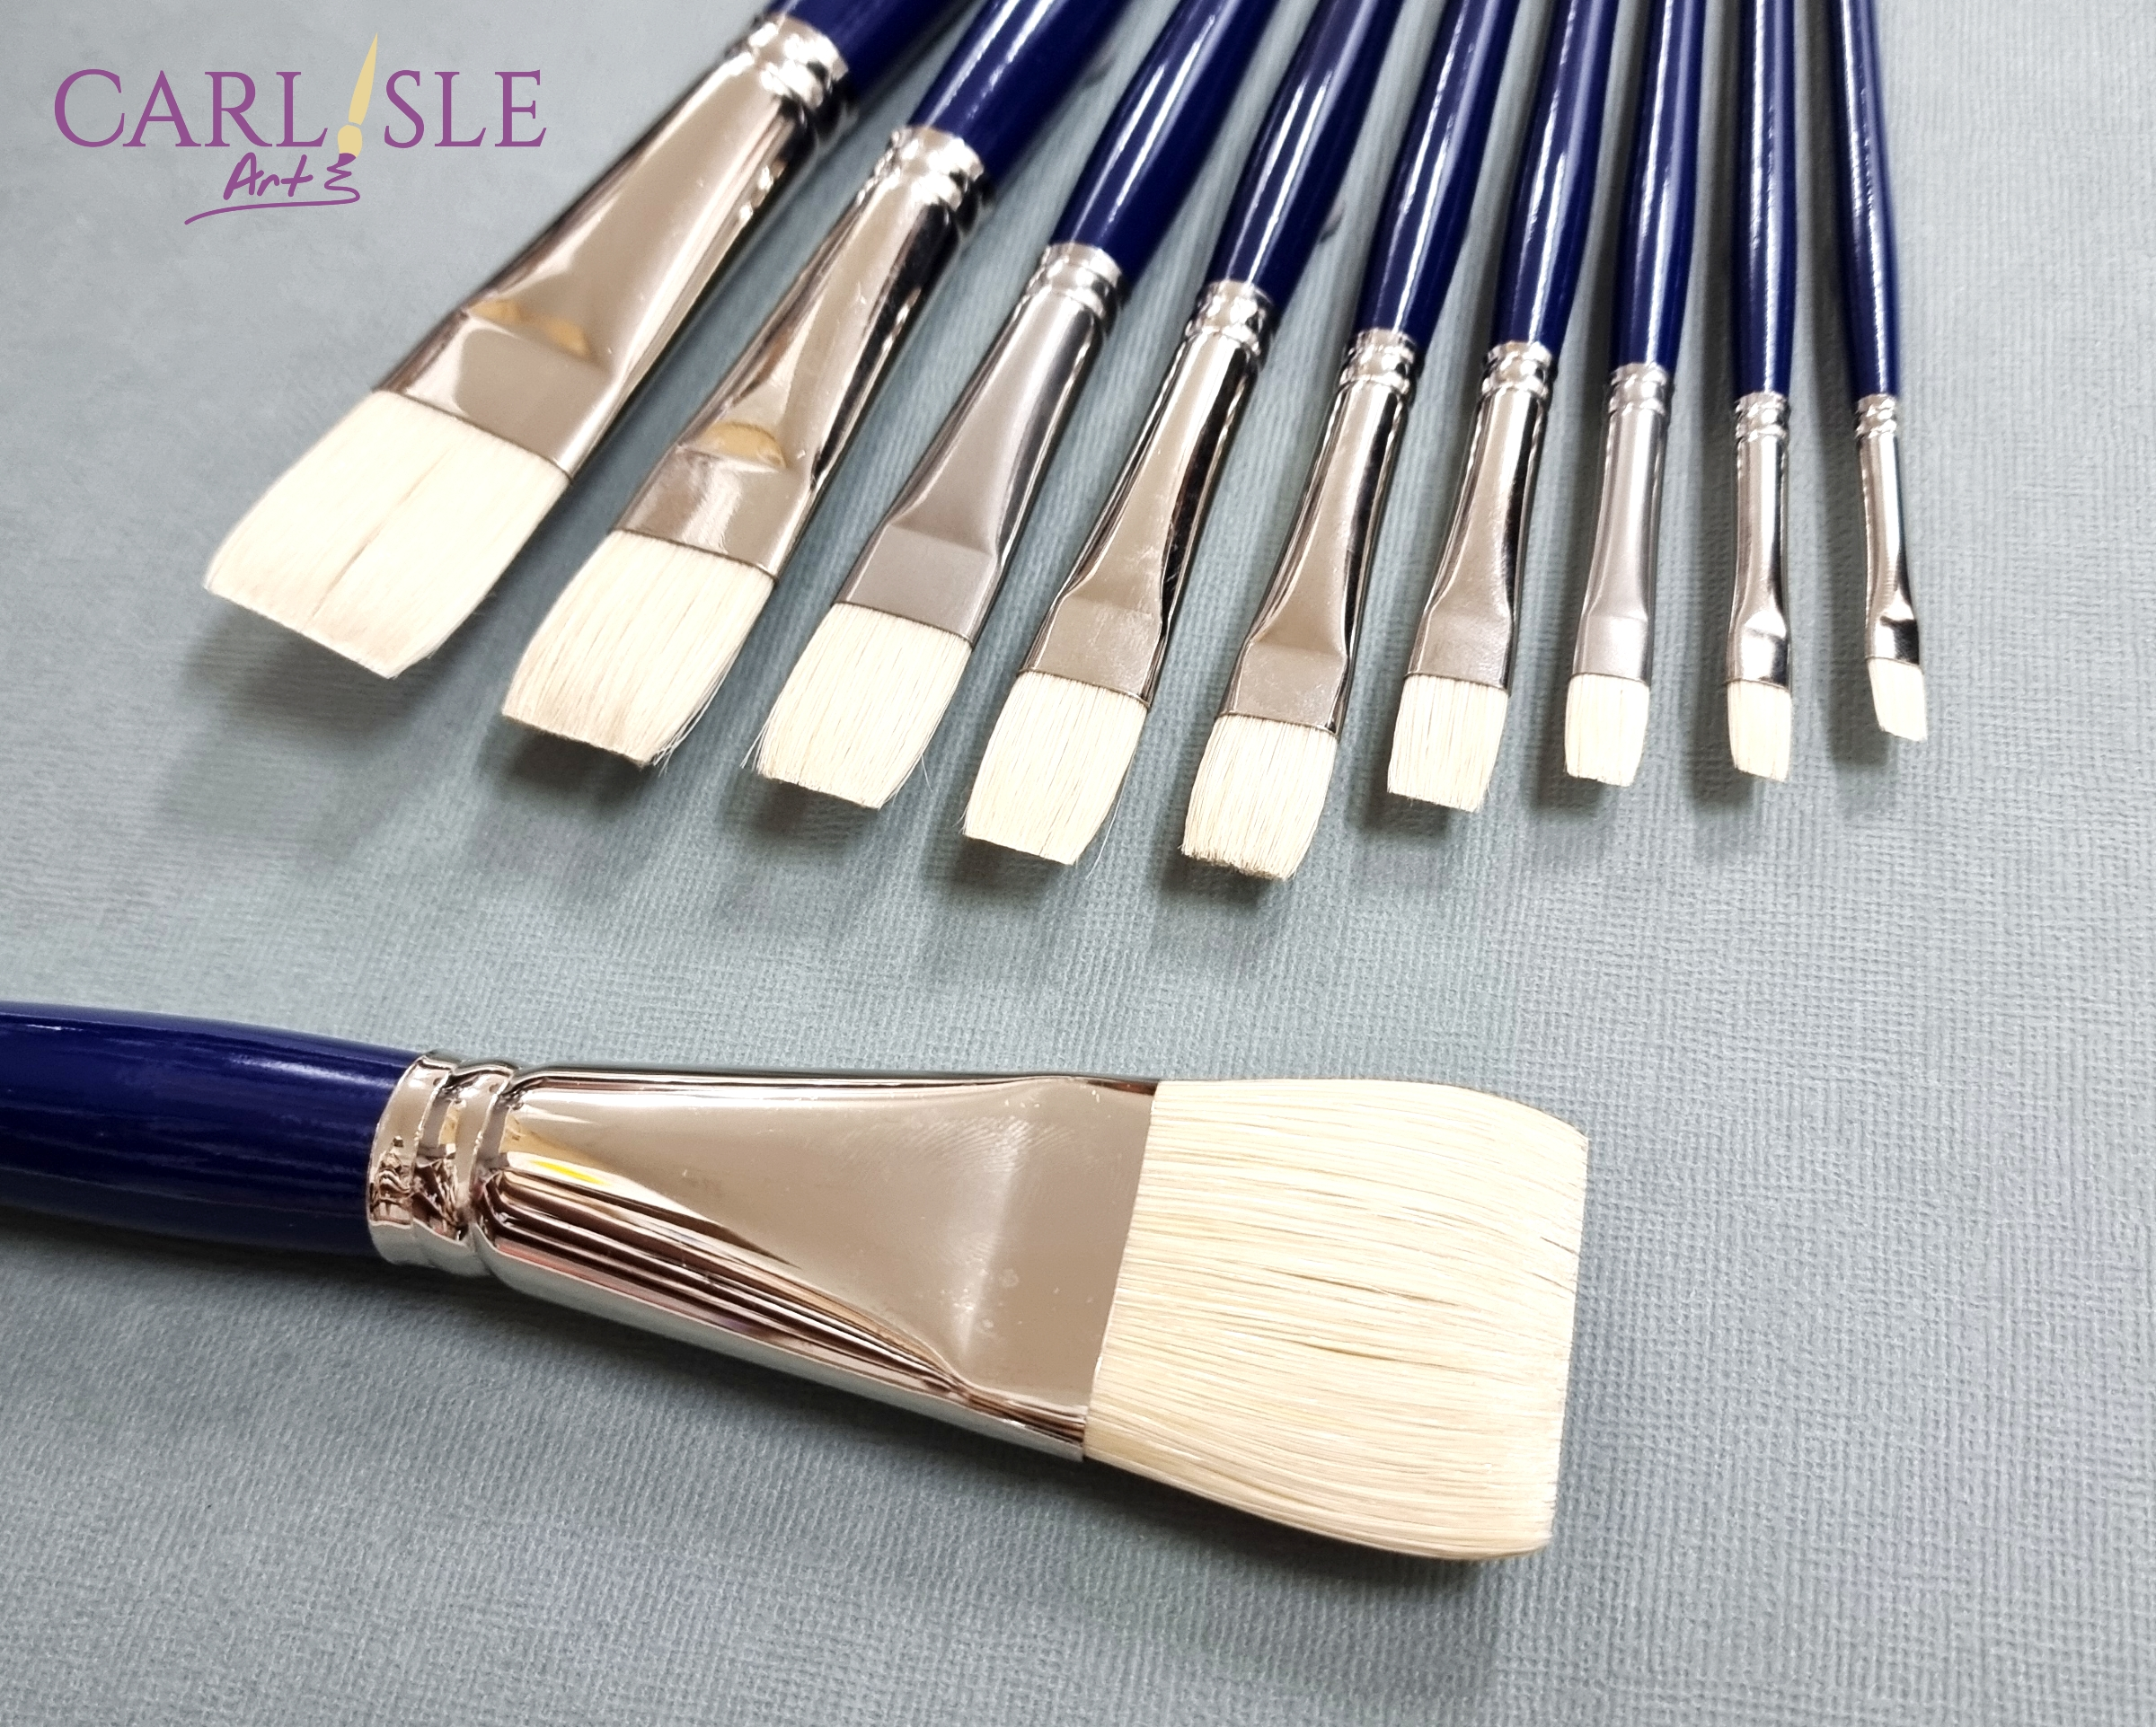 Find your Art Spectrum Extra Soft Brush Varnish Size - 50mm 130 and Shop Now